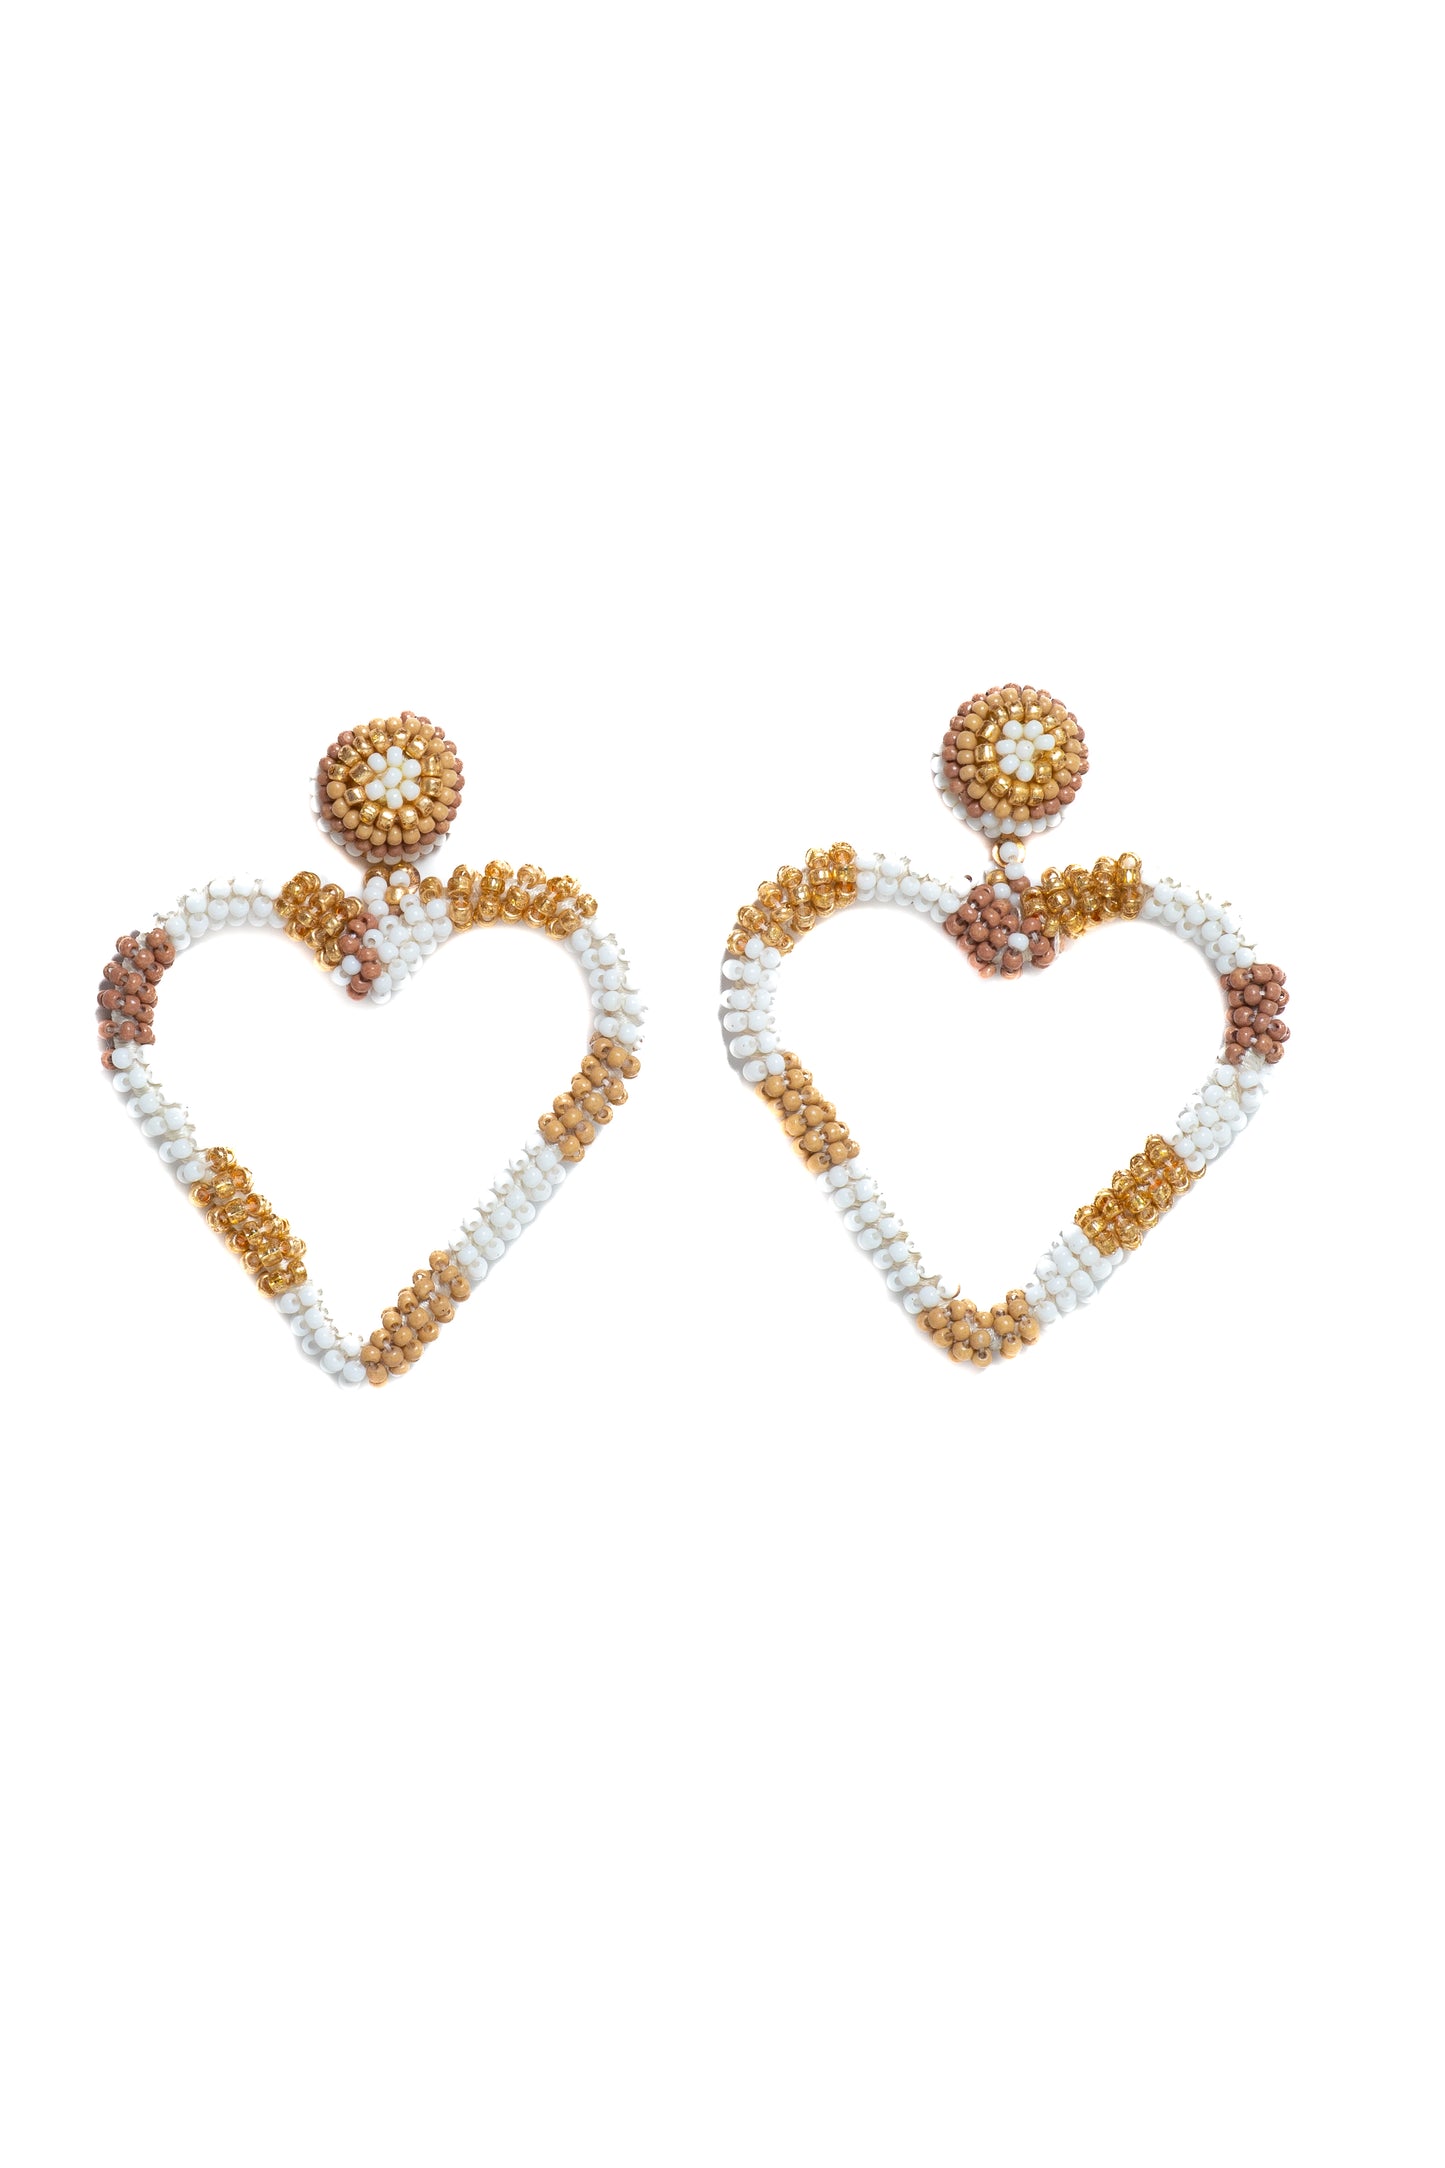 Ivory White And Yellow Gold Heart Shaped Earrings